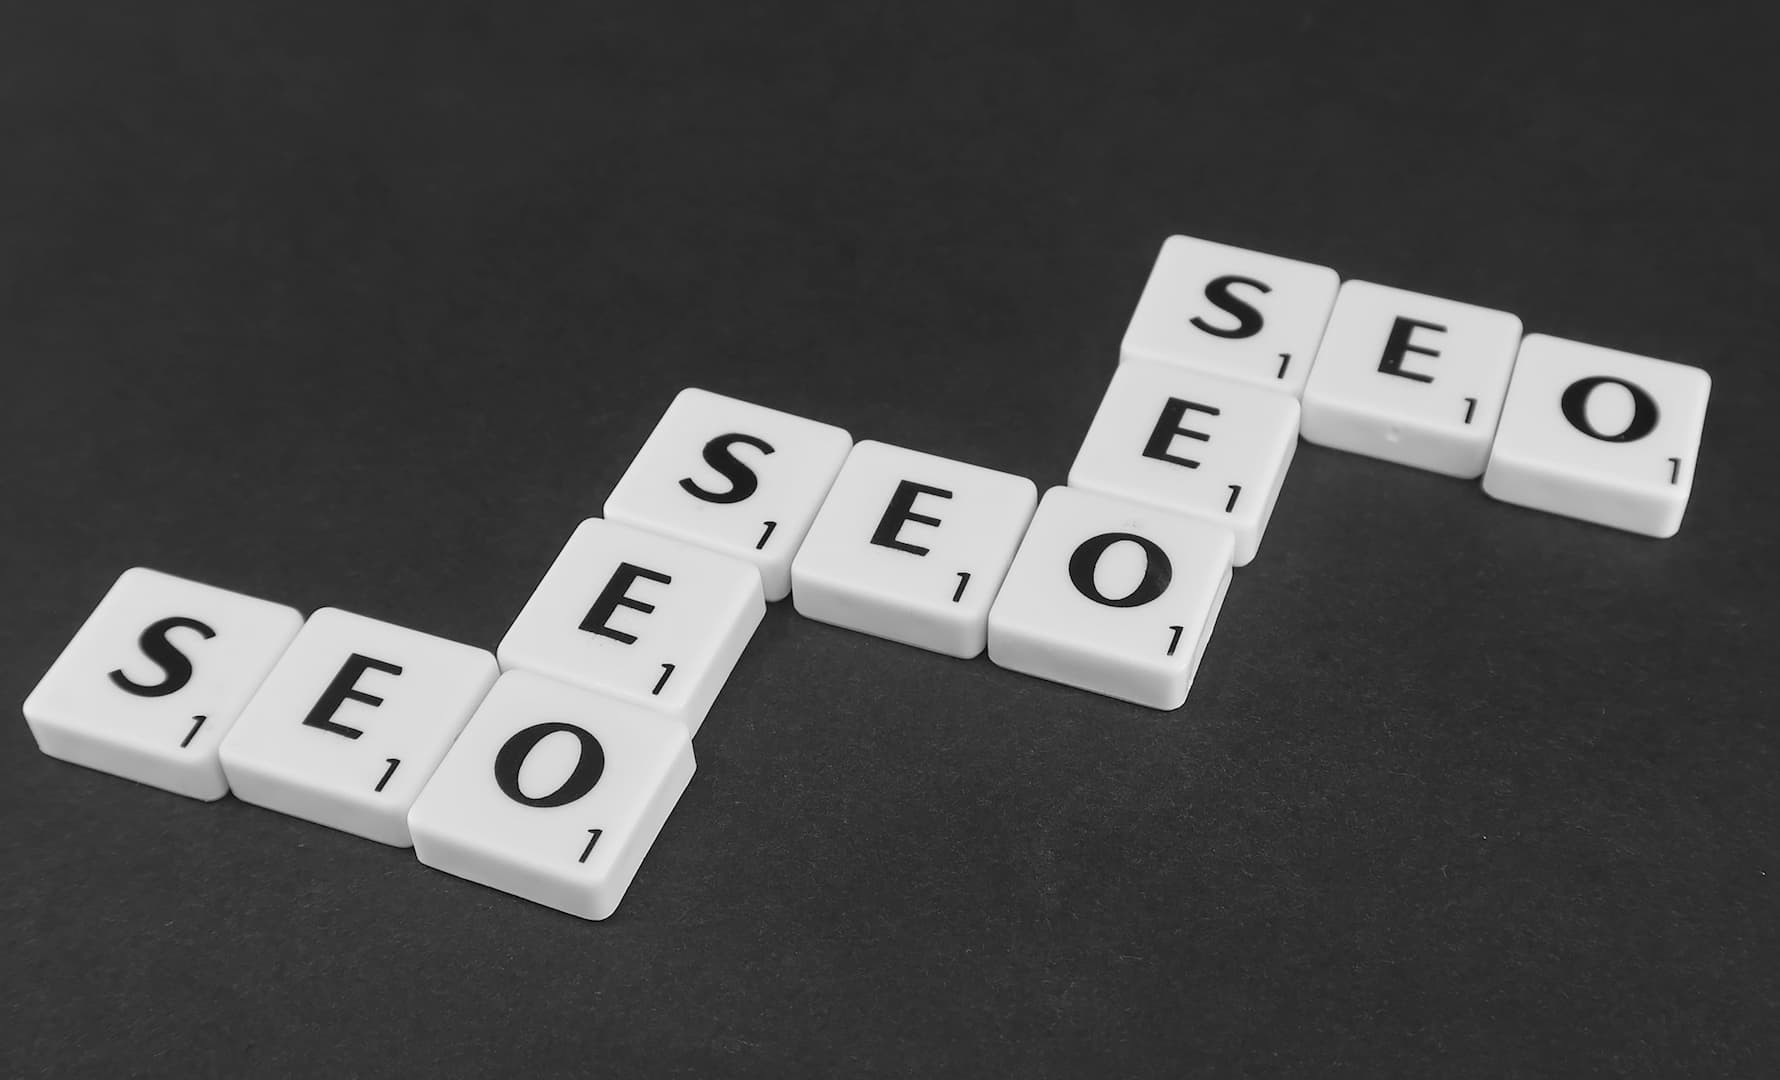 DPP Part 12: 5 ways to increase your visibility on Google - The practitioner's guide to SEO